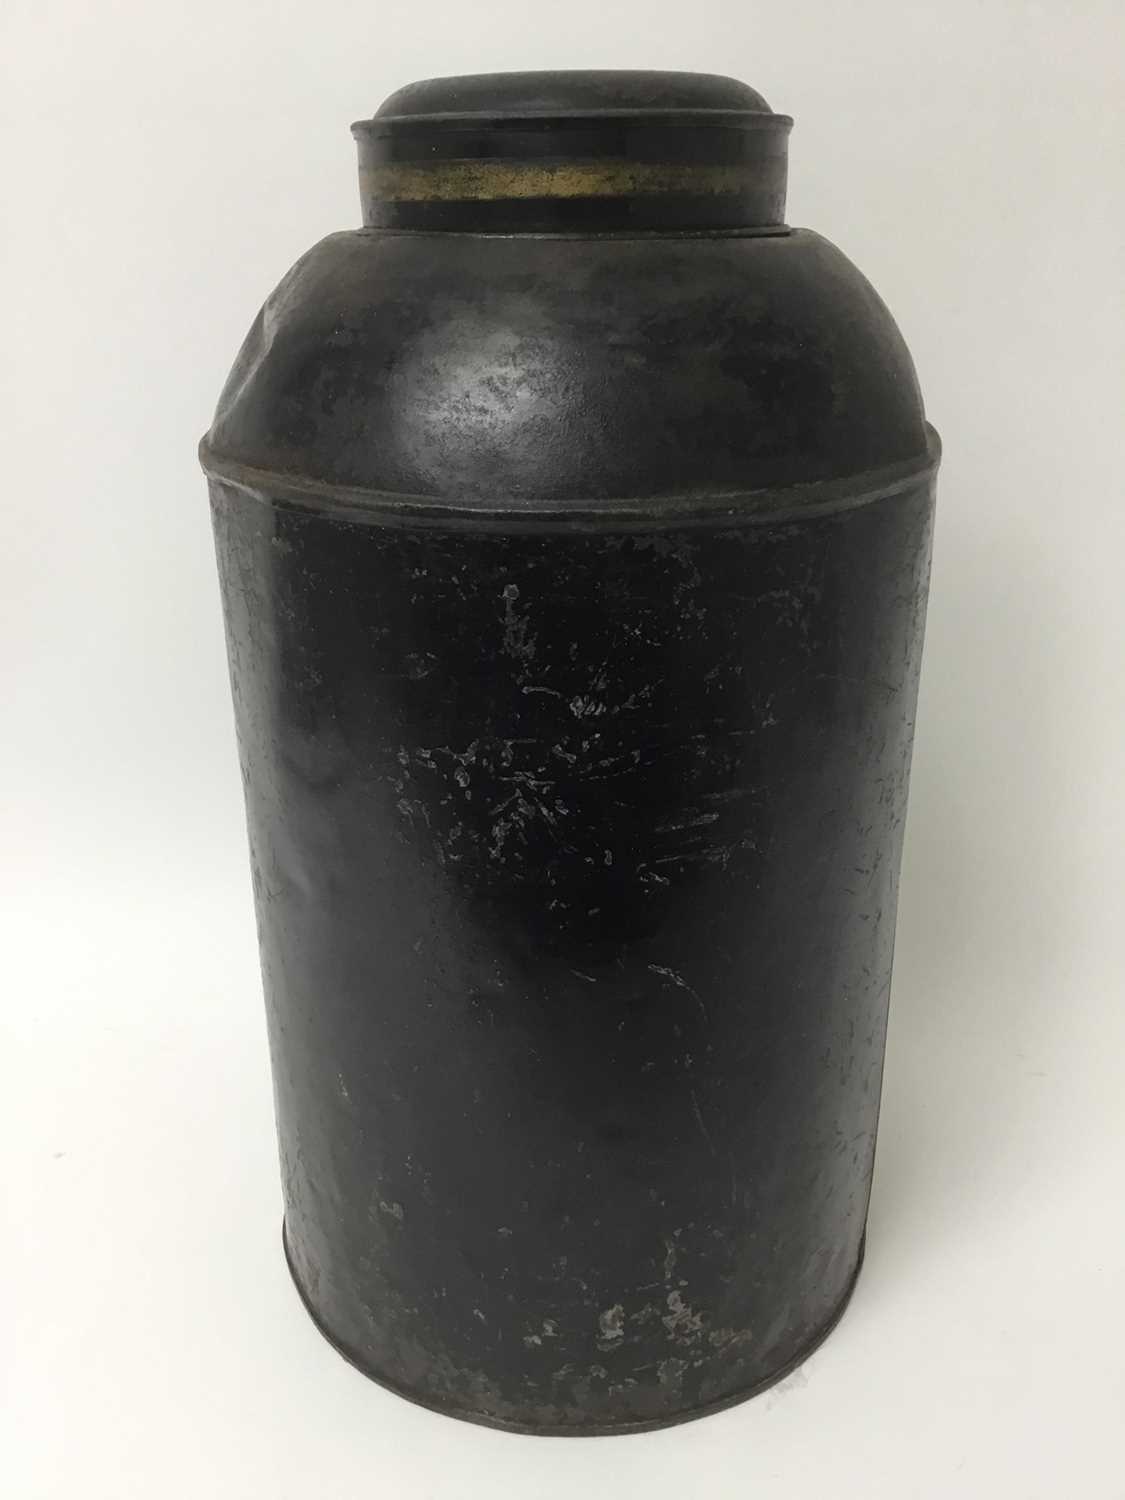 Chinoiserie toleware canister - Image 3 of 4